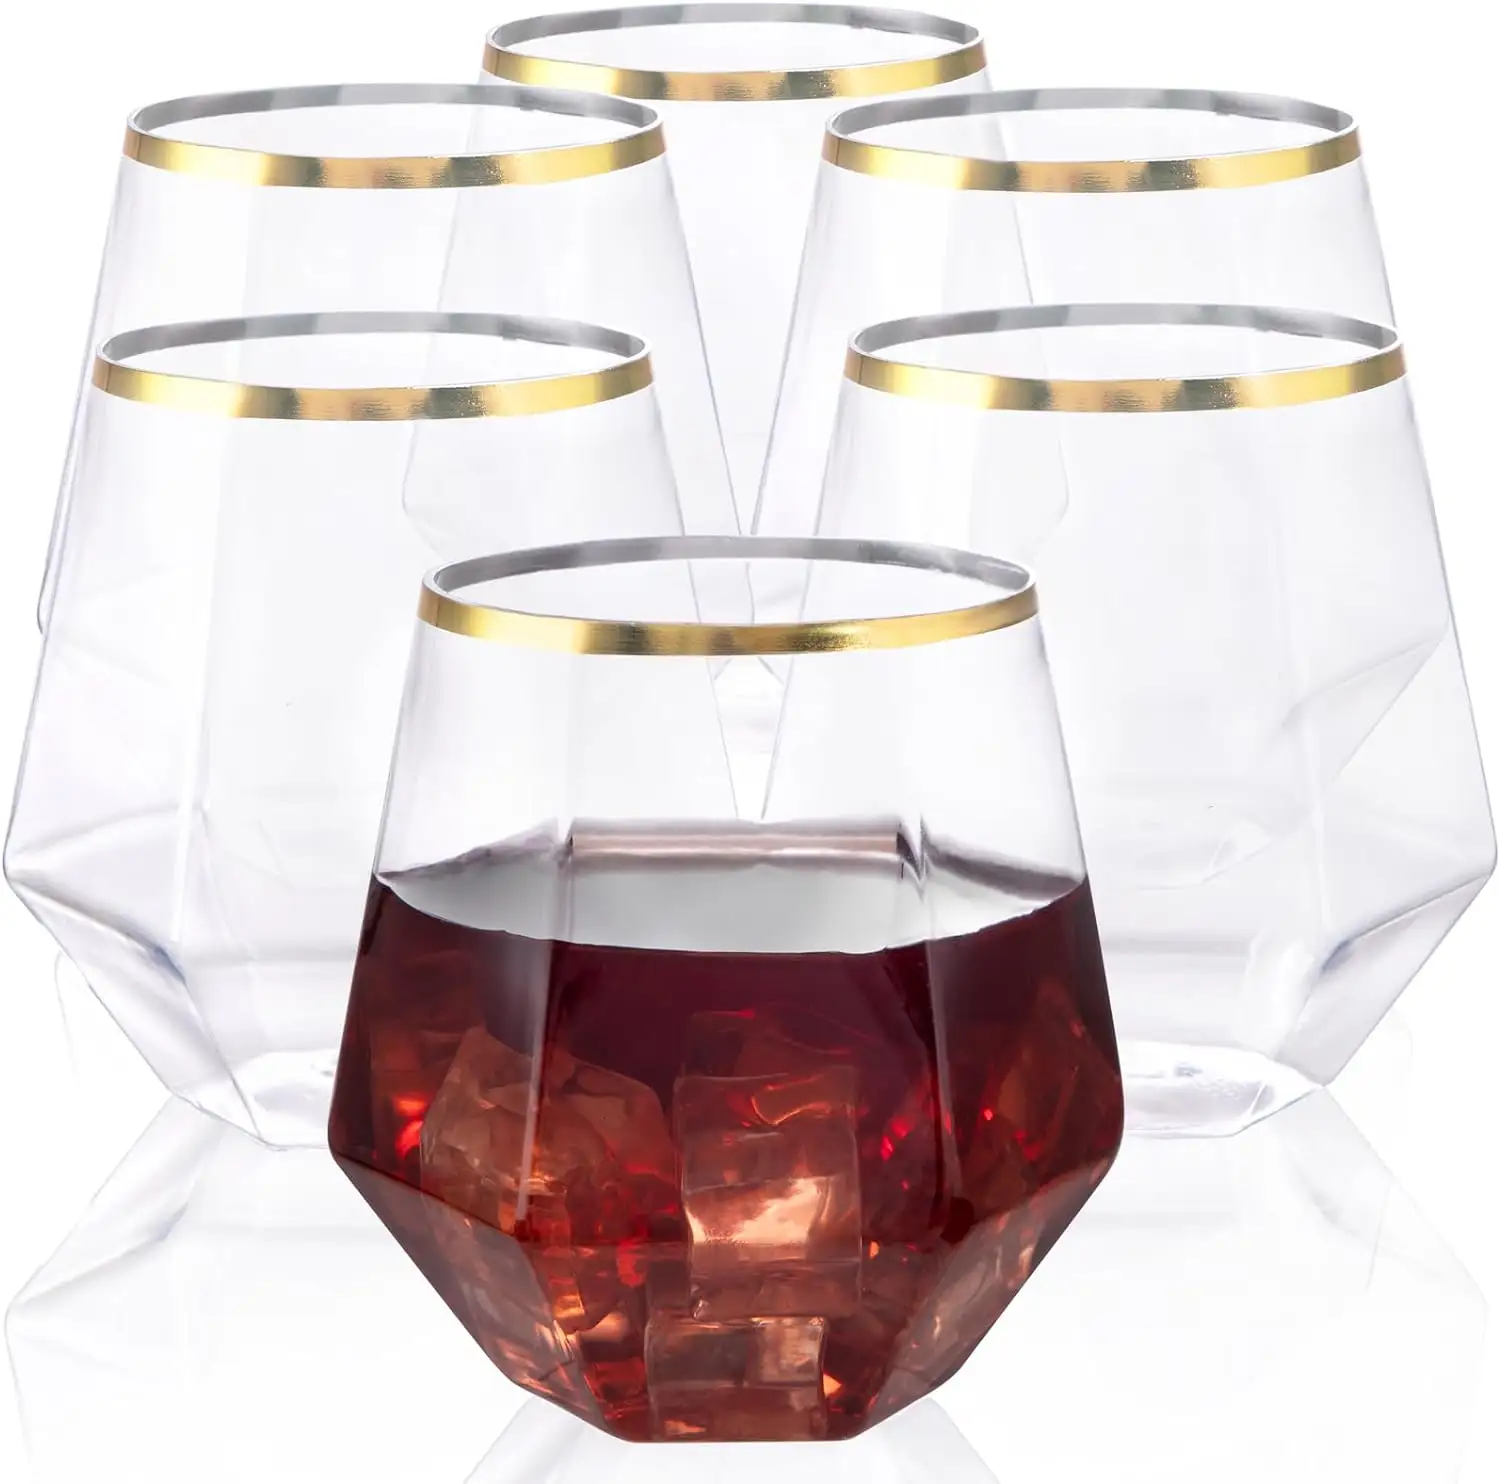 12 Oz Clear Gold Rim Unbreakable Diamond Shape Plastic Stemless Wine Glasses Set of 100, Whiskey Glasses for Birthday Party